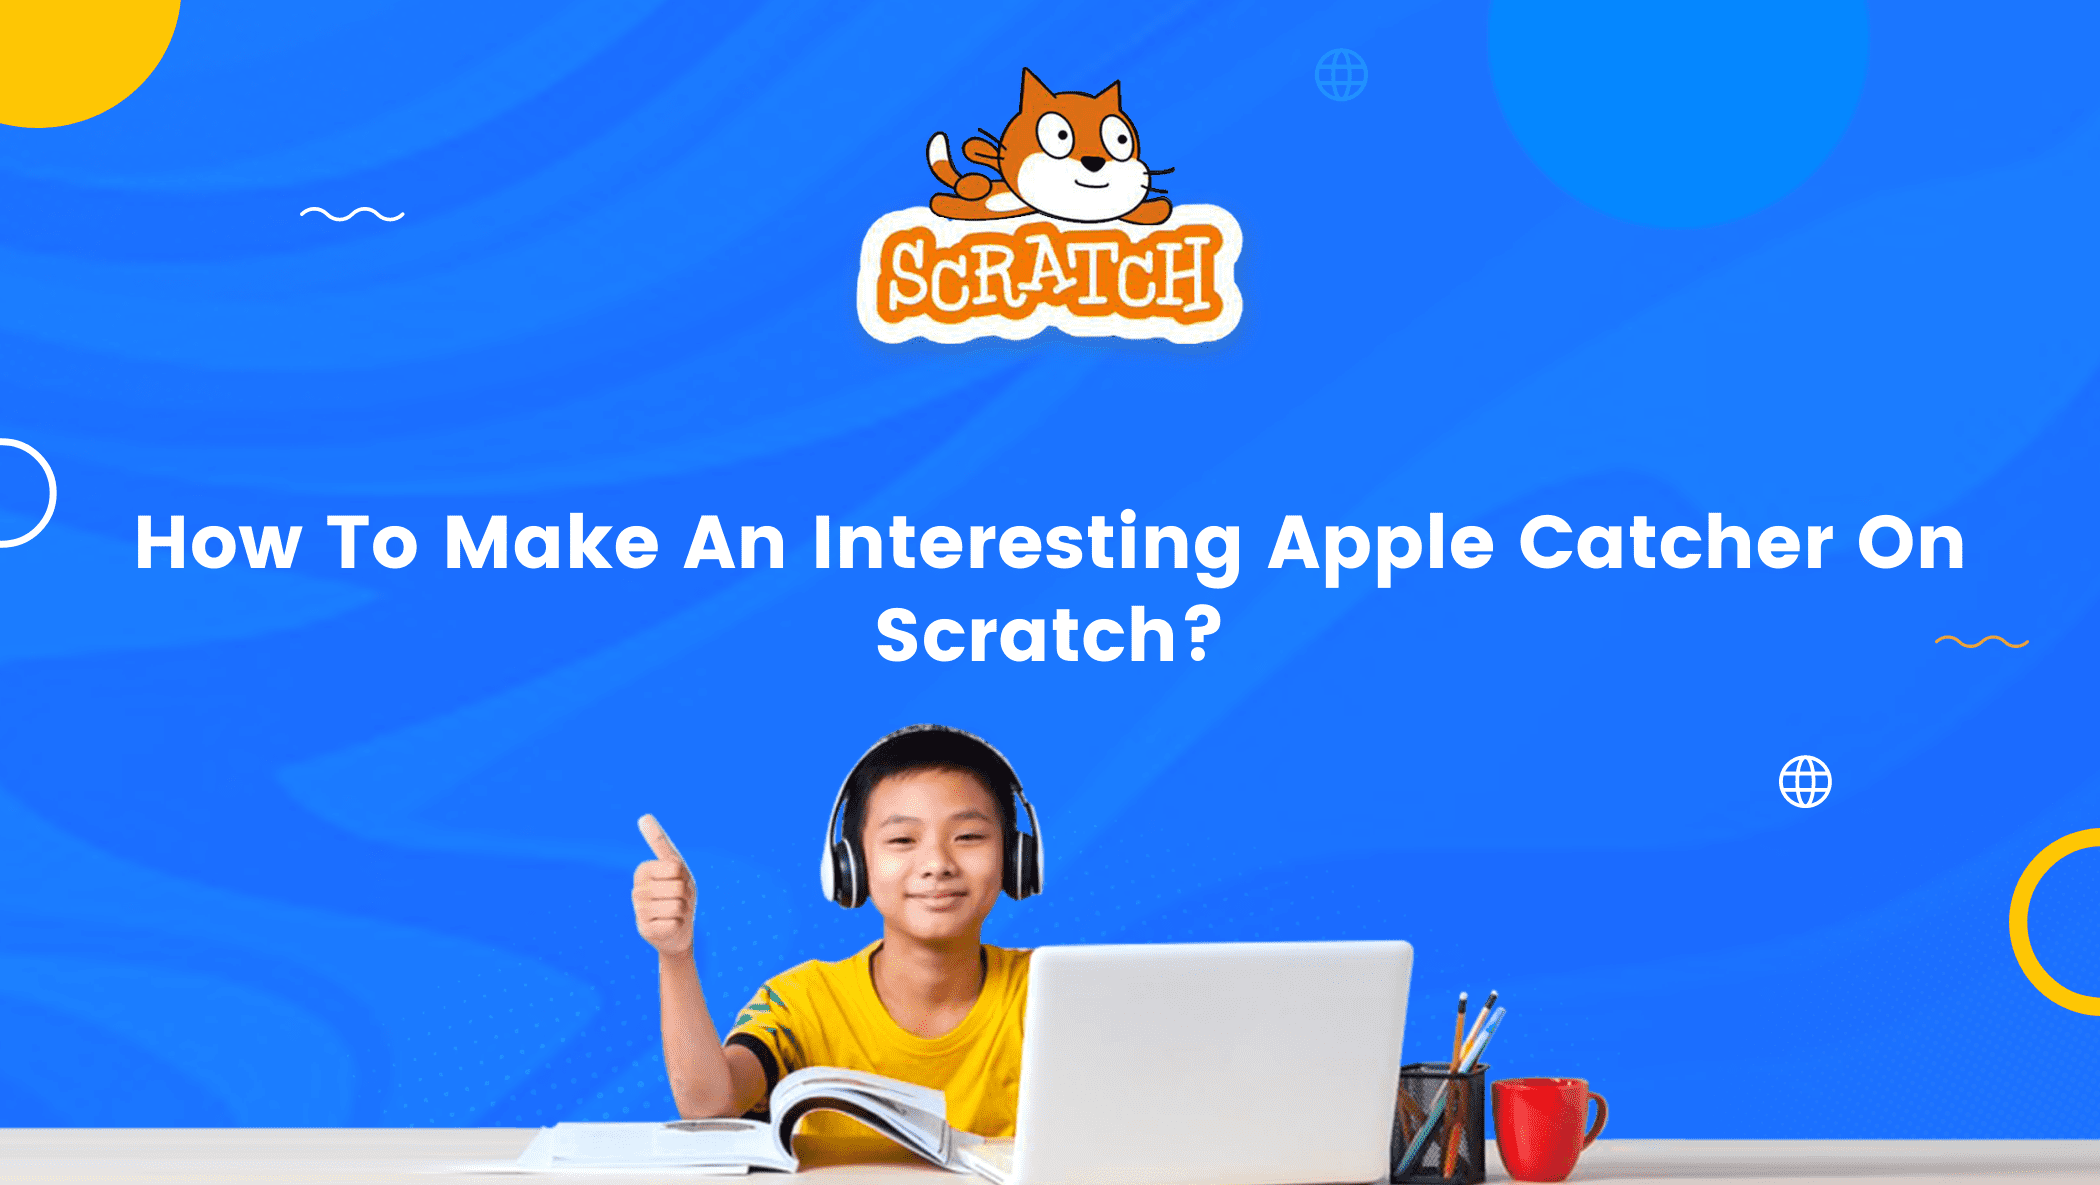 How To Make An Interesting Apple Catcher On Scratch